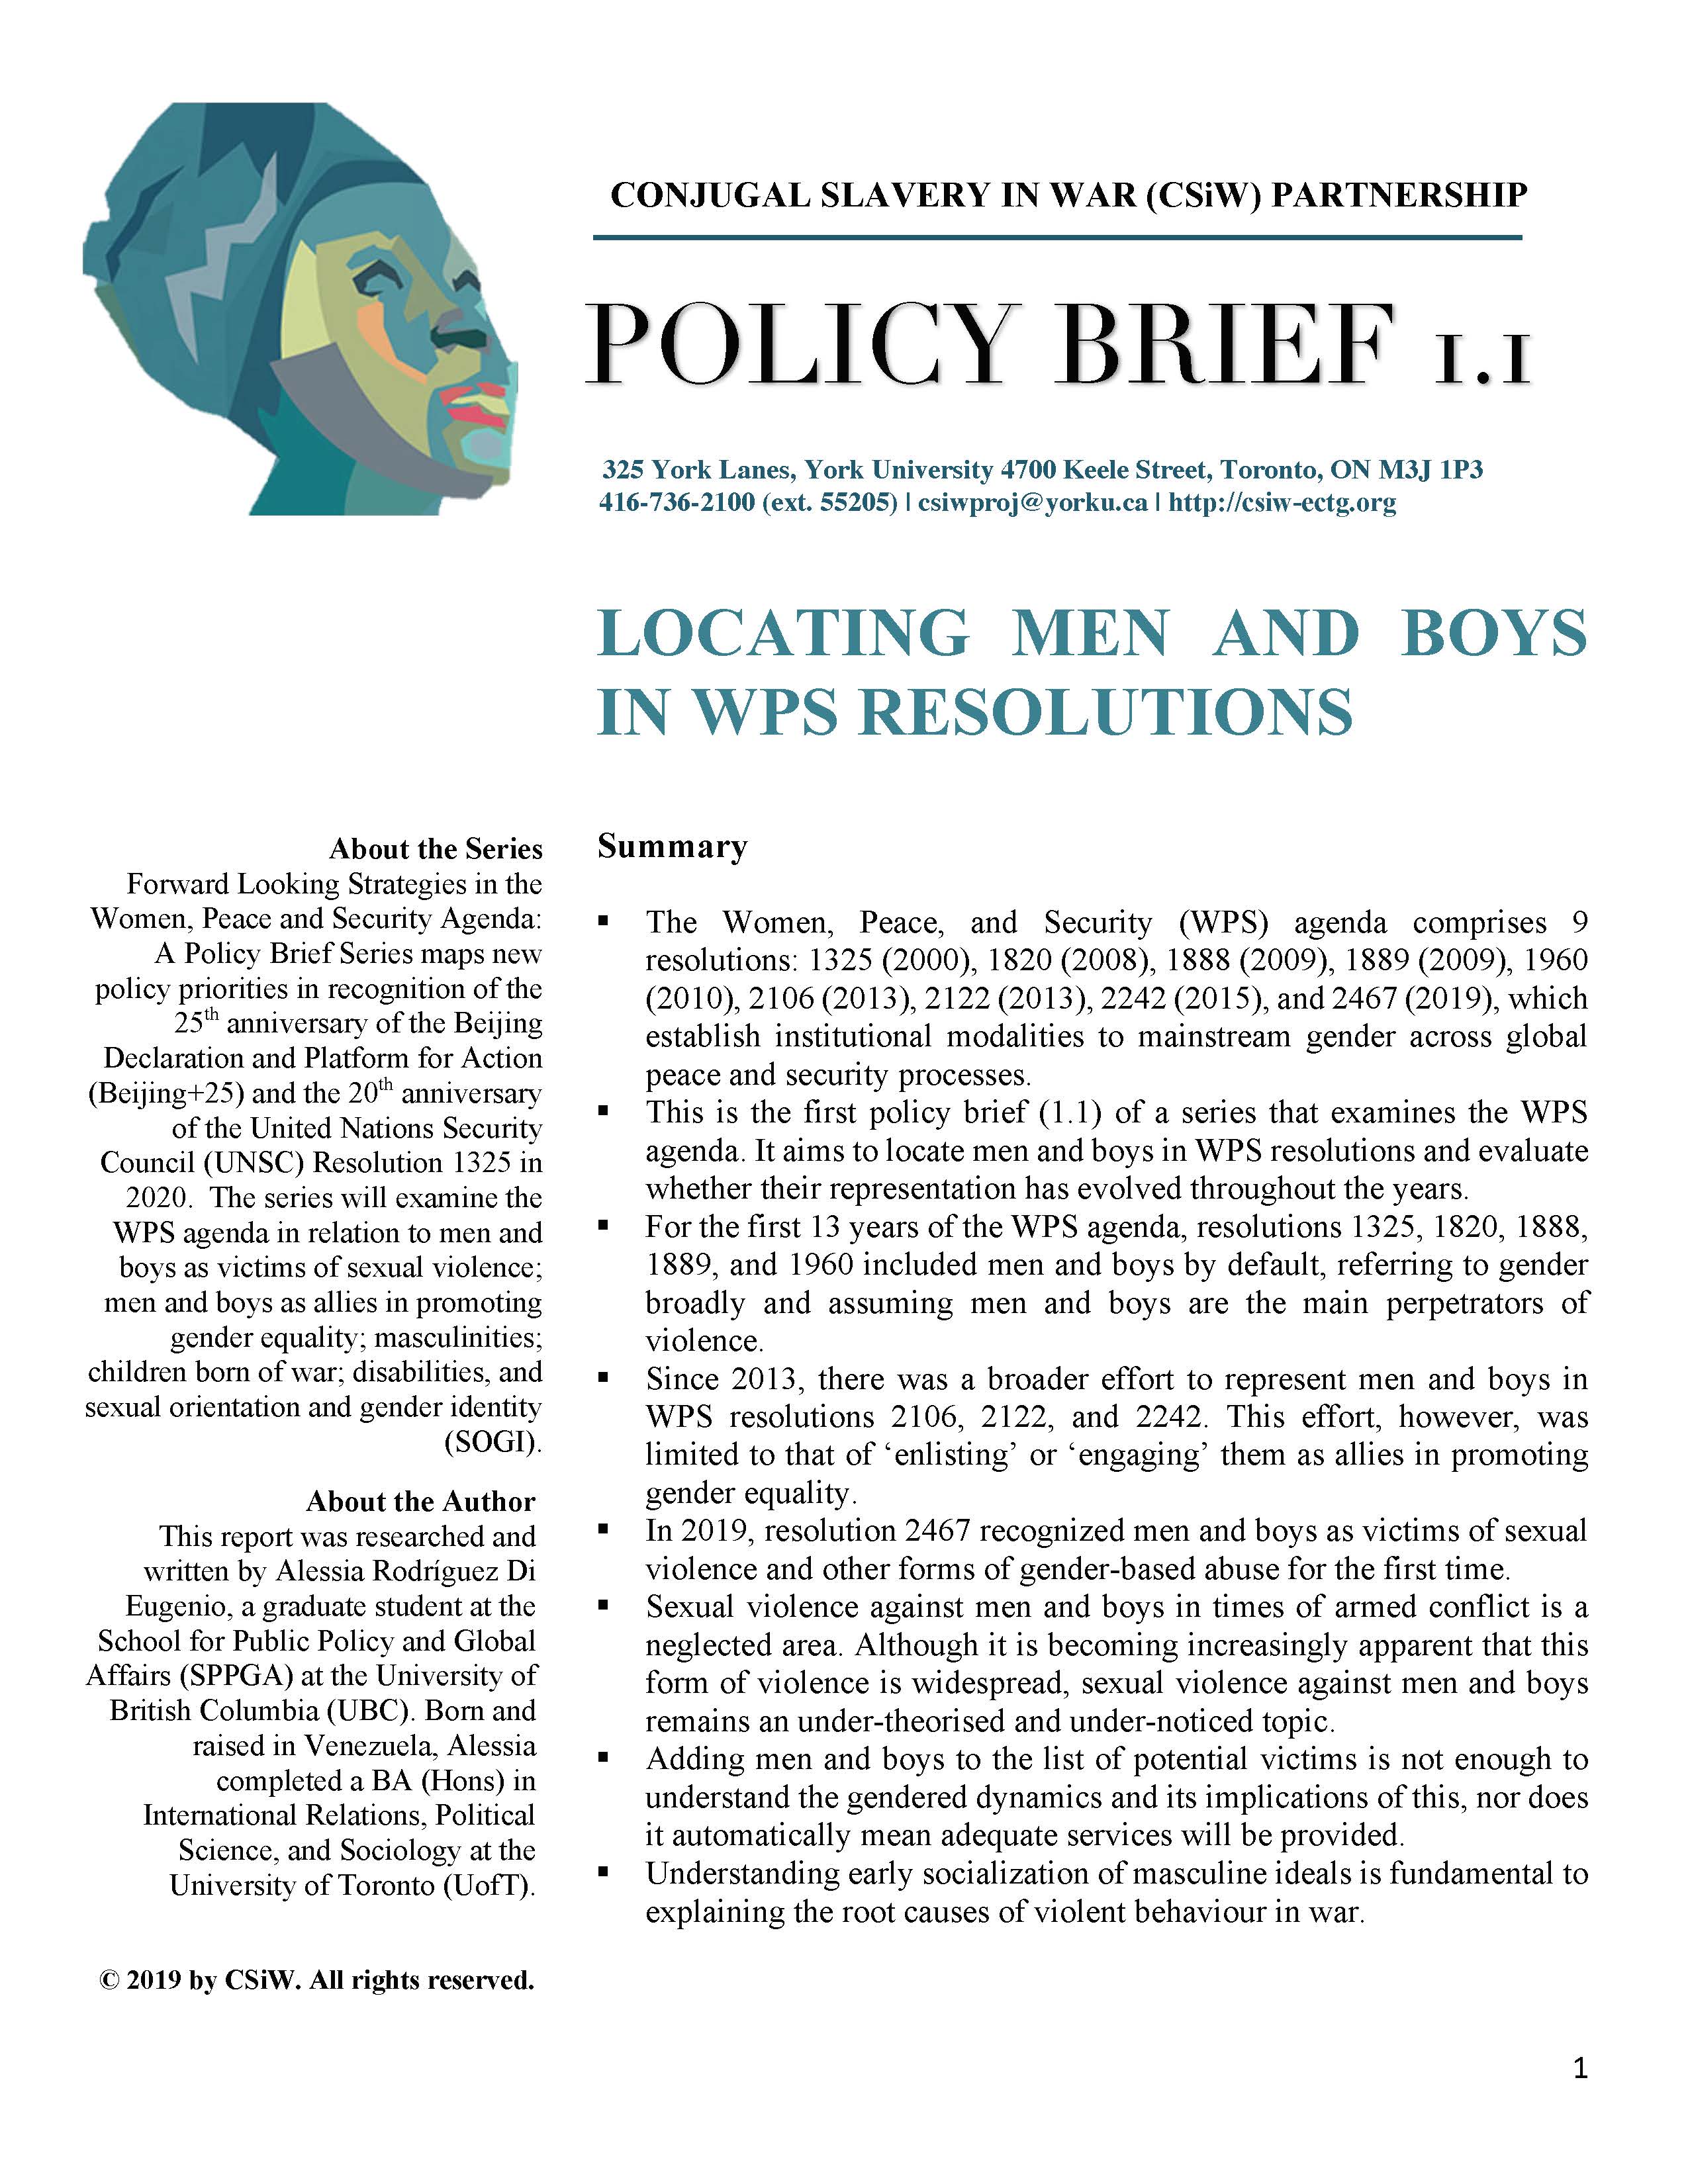 Policy Brief 1.1. Locating men and boys in WPS Resolutions